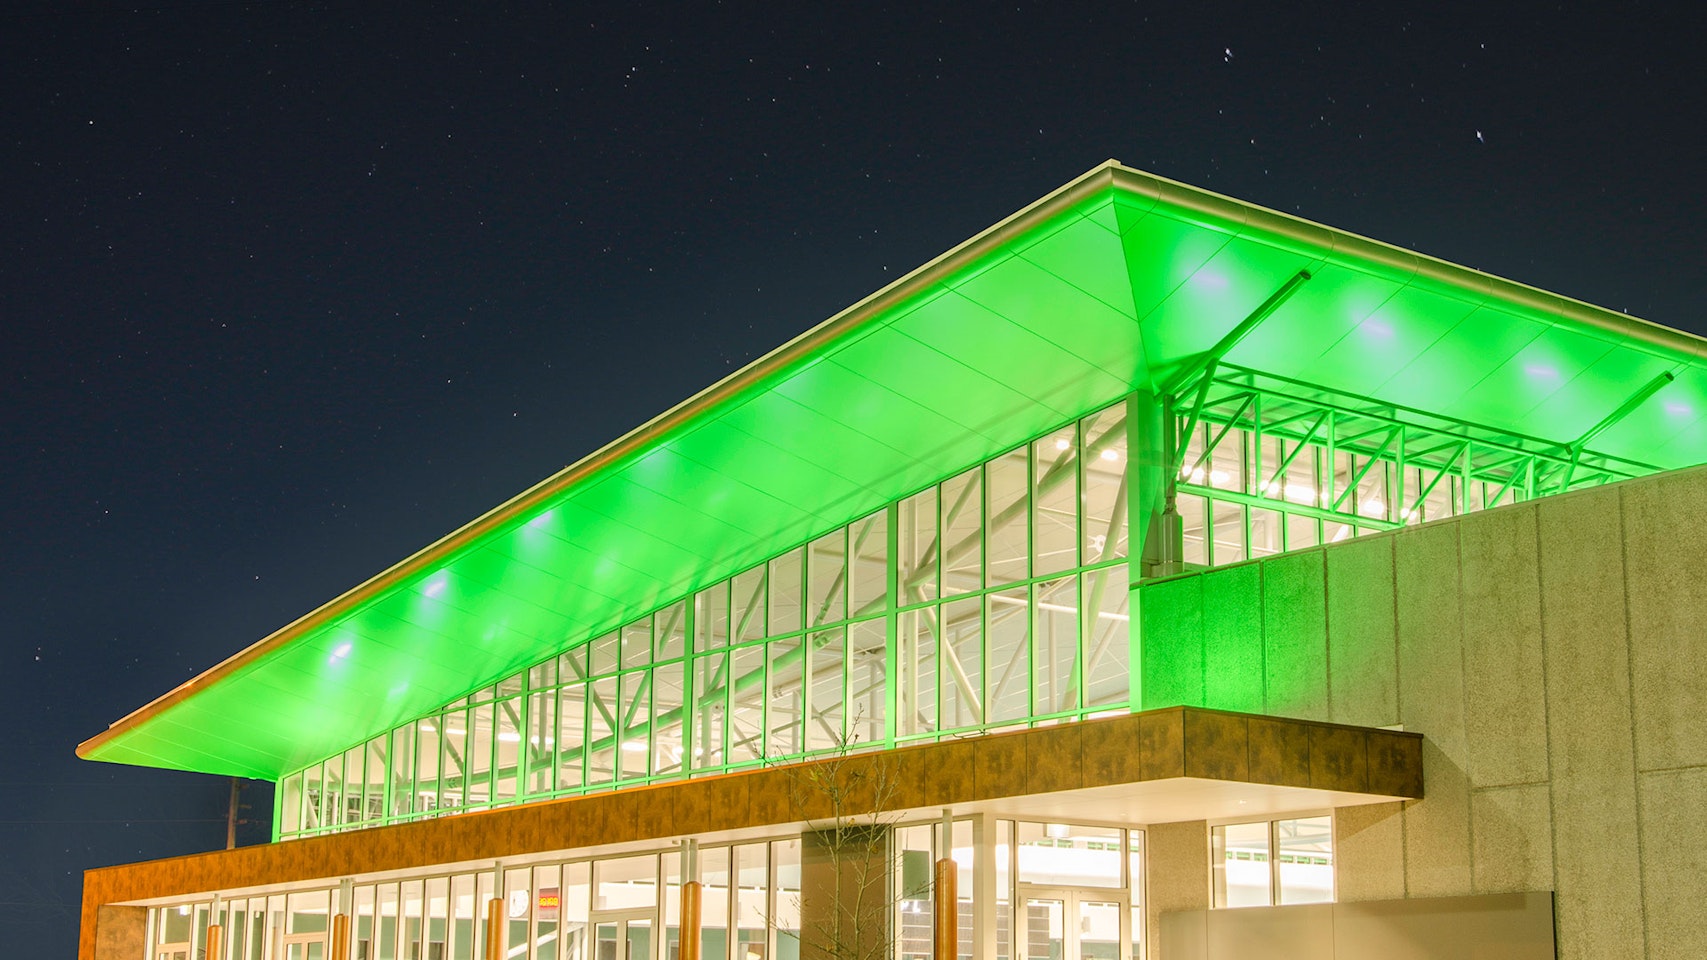 Maxis high-power linear floodlight in application, installed in The Ballarat Aquatic & Lifestyle Centre. The striking structure has quickly become a local icon.